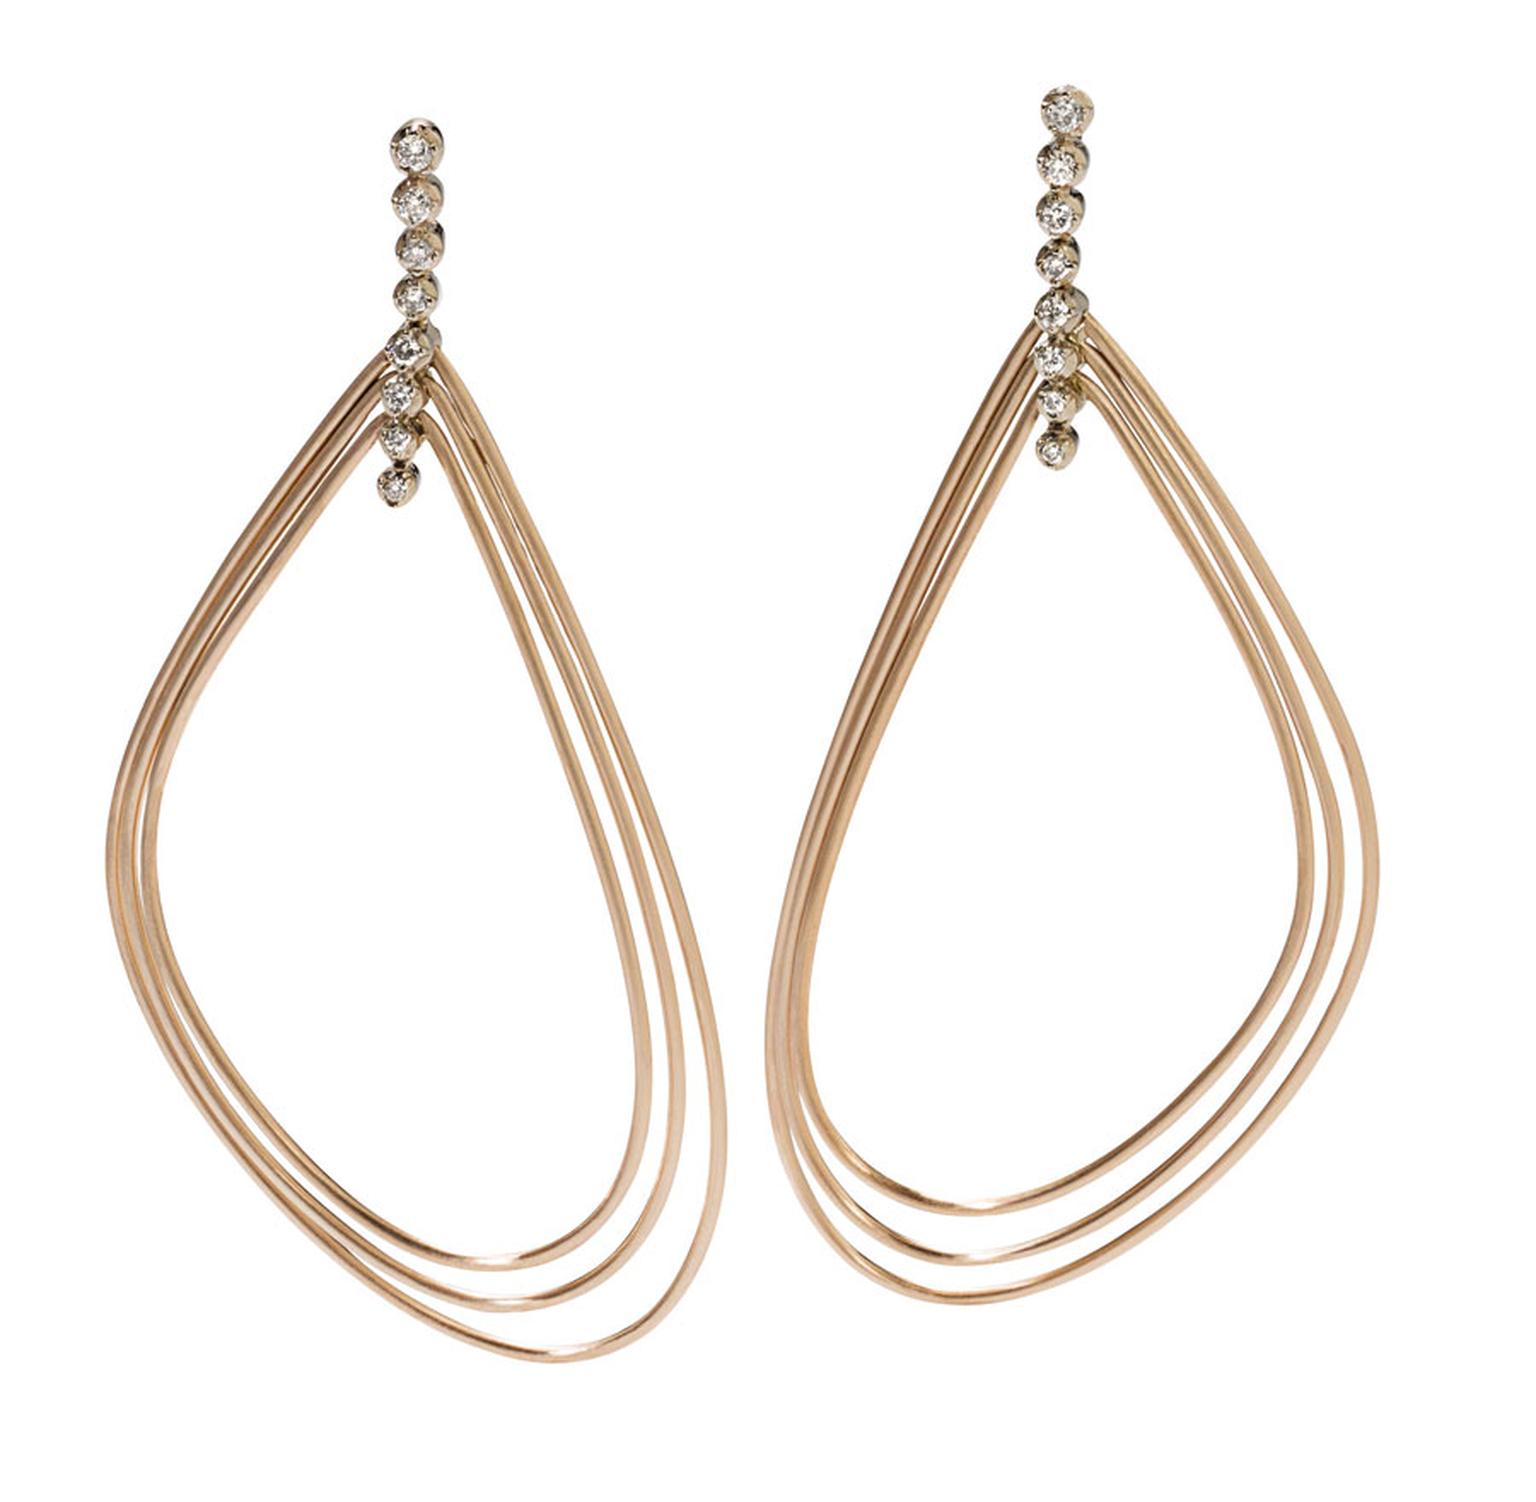 H-Stern-Earrings-in-rose-gold-with-18K-Noble-Gold-and-diamonds.jpg